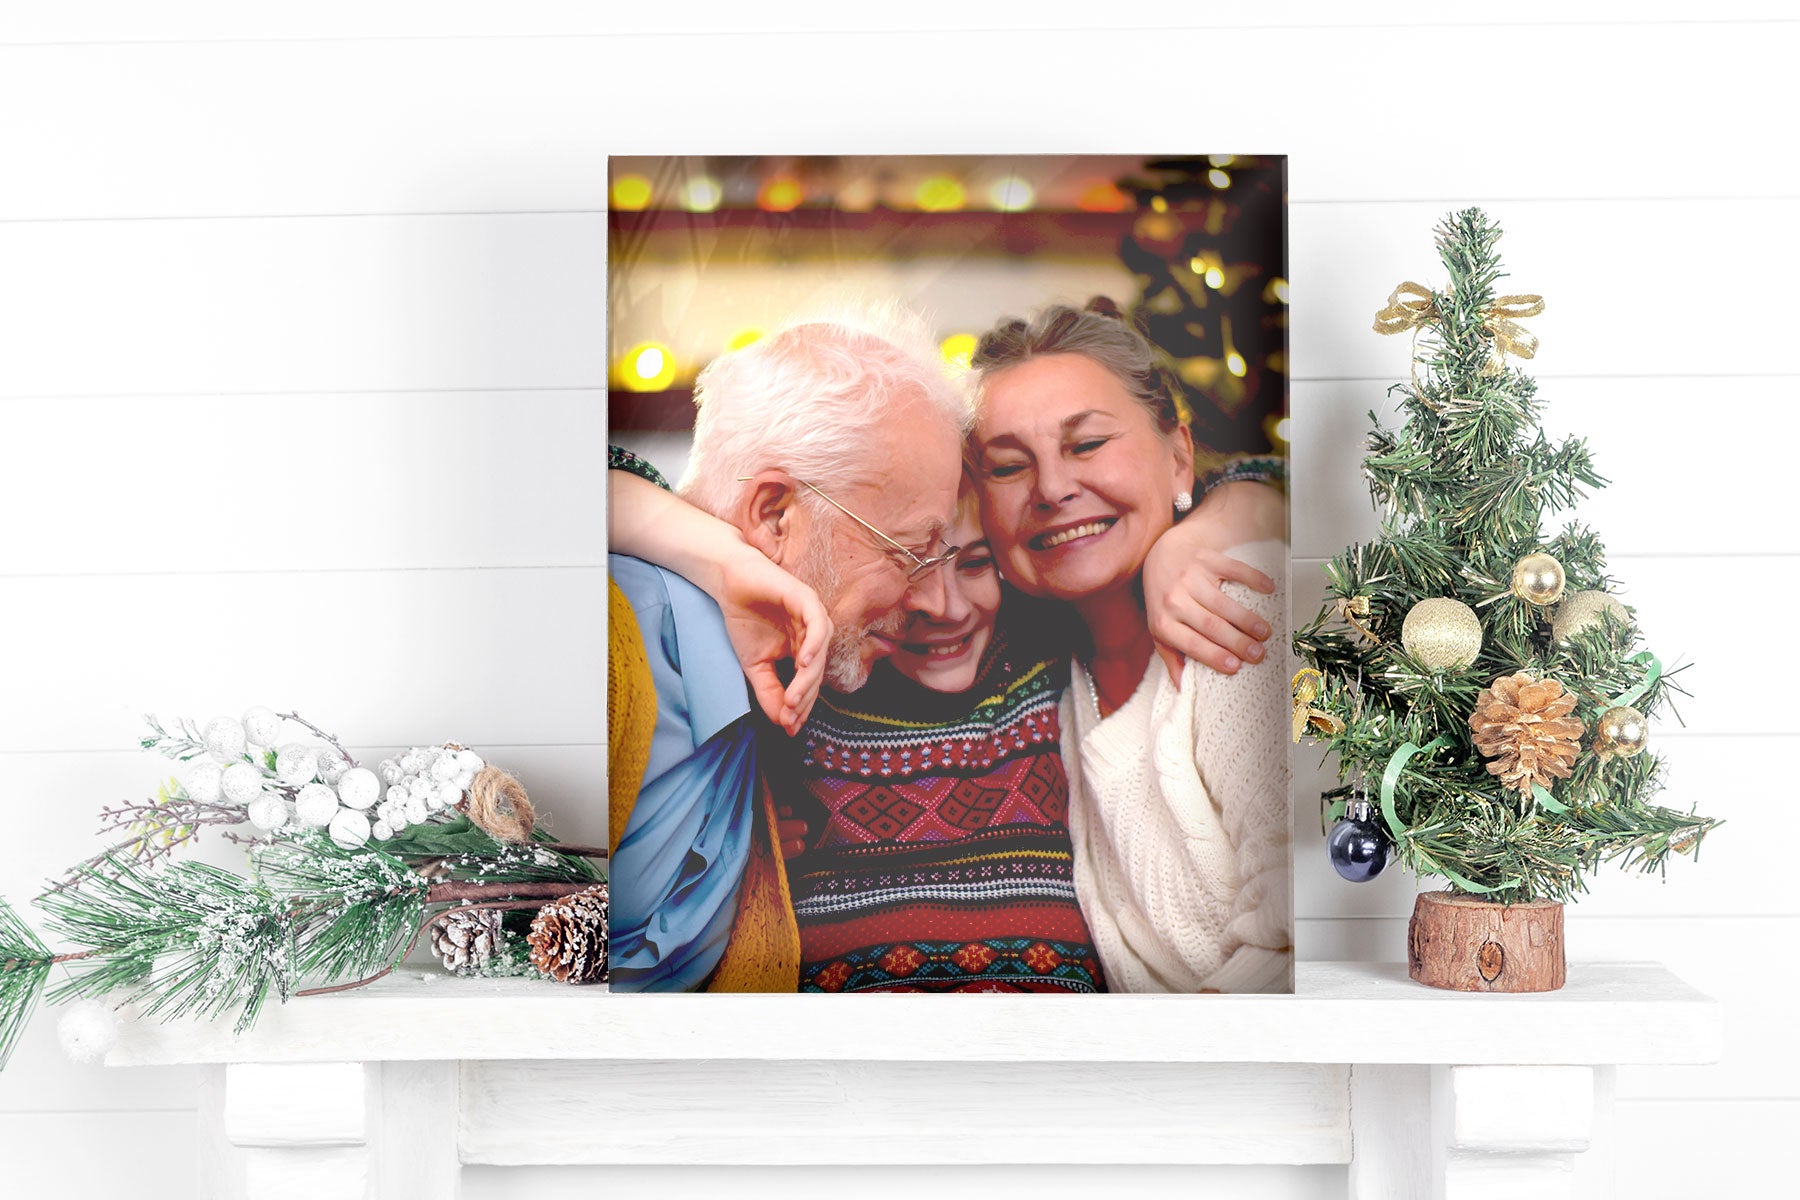 Photo Printed on Acrylic: Holiday Gift Guide 2021